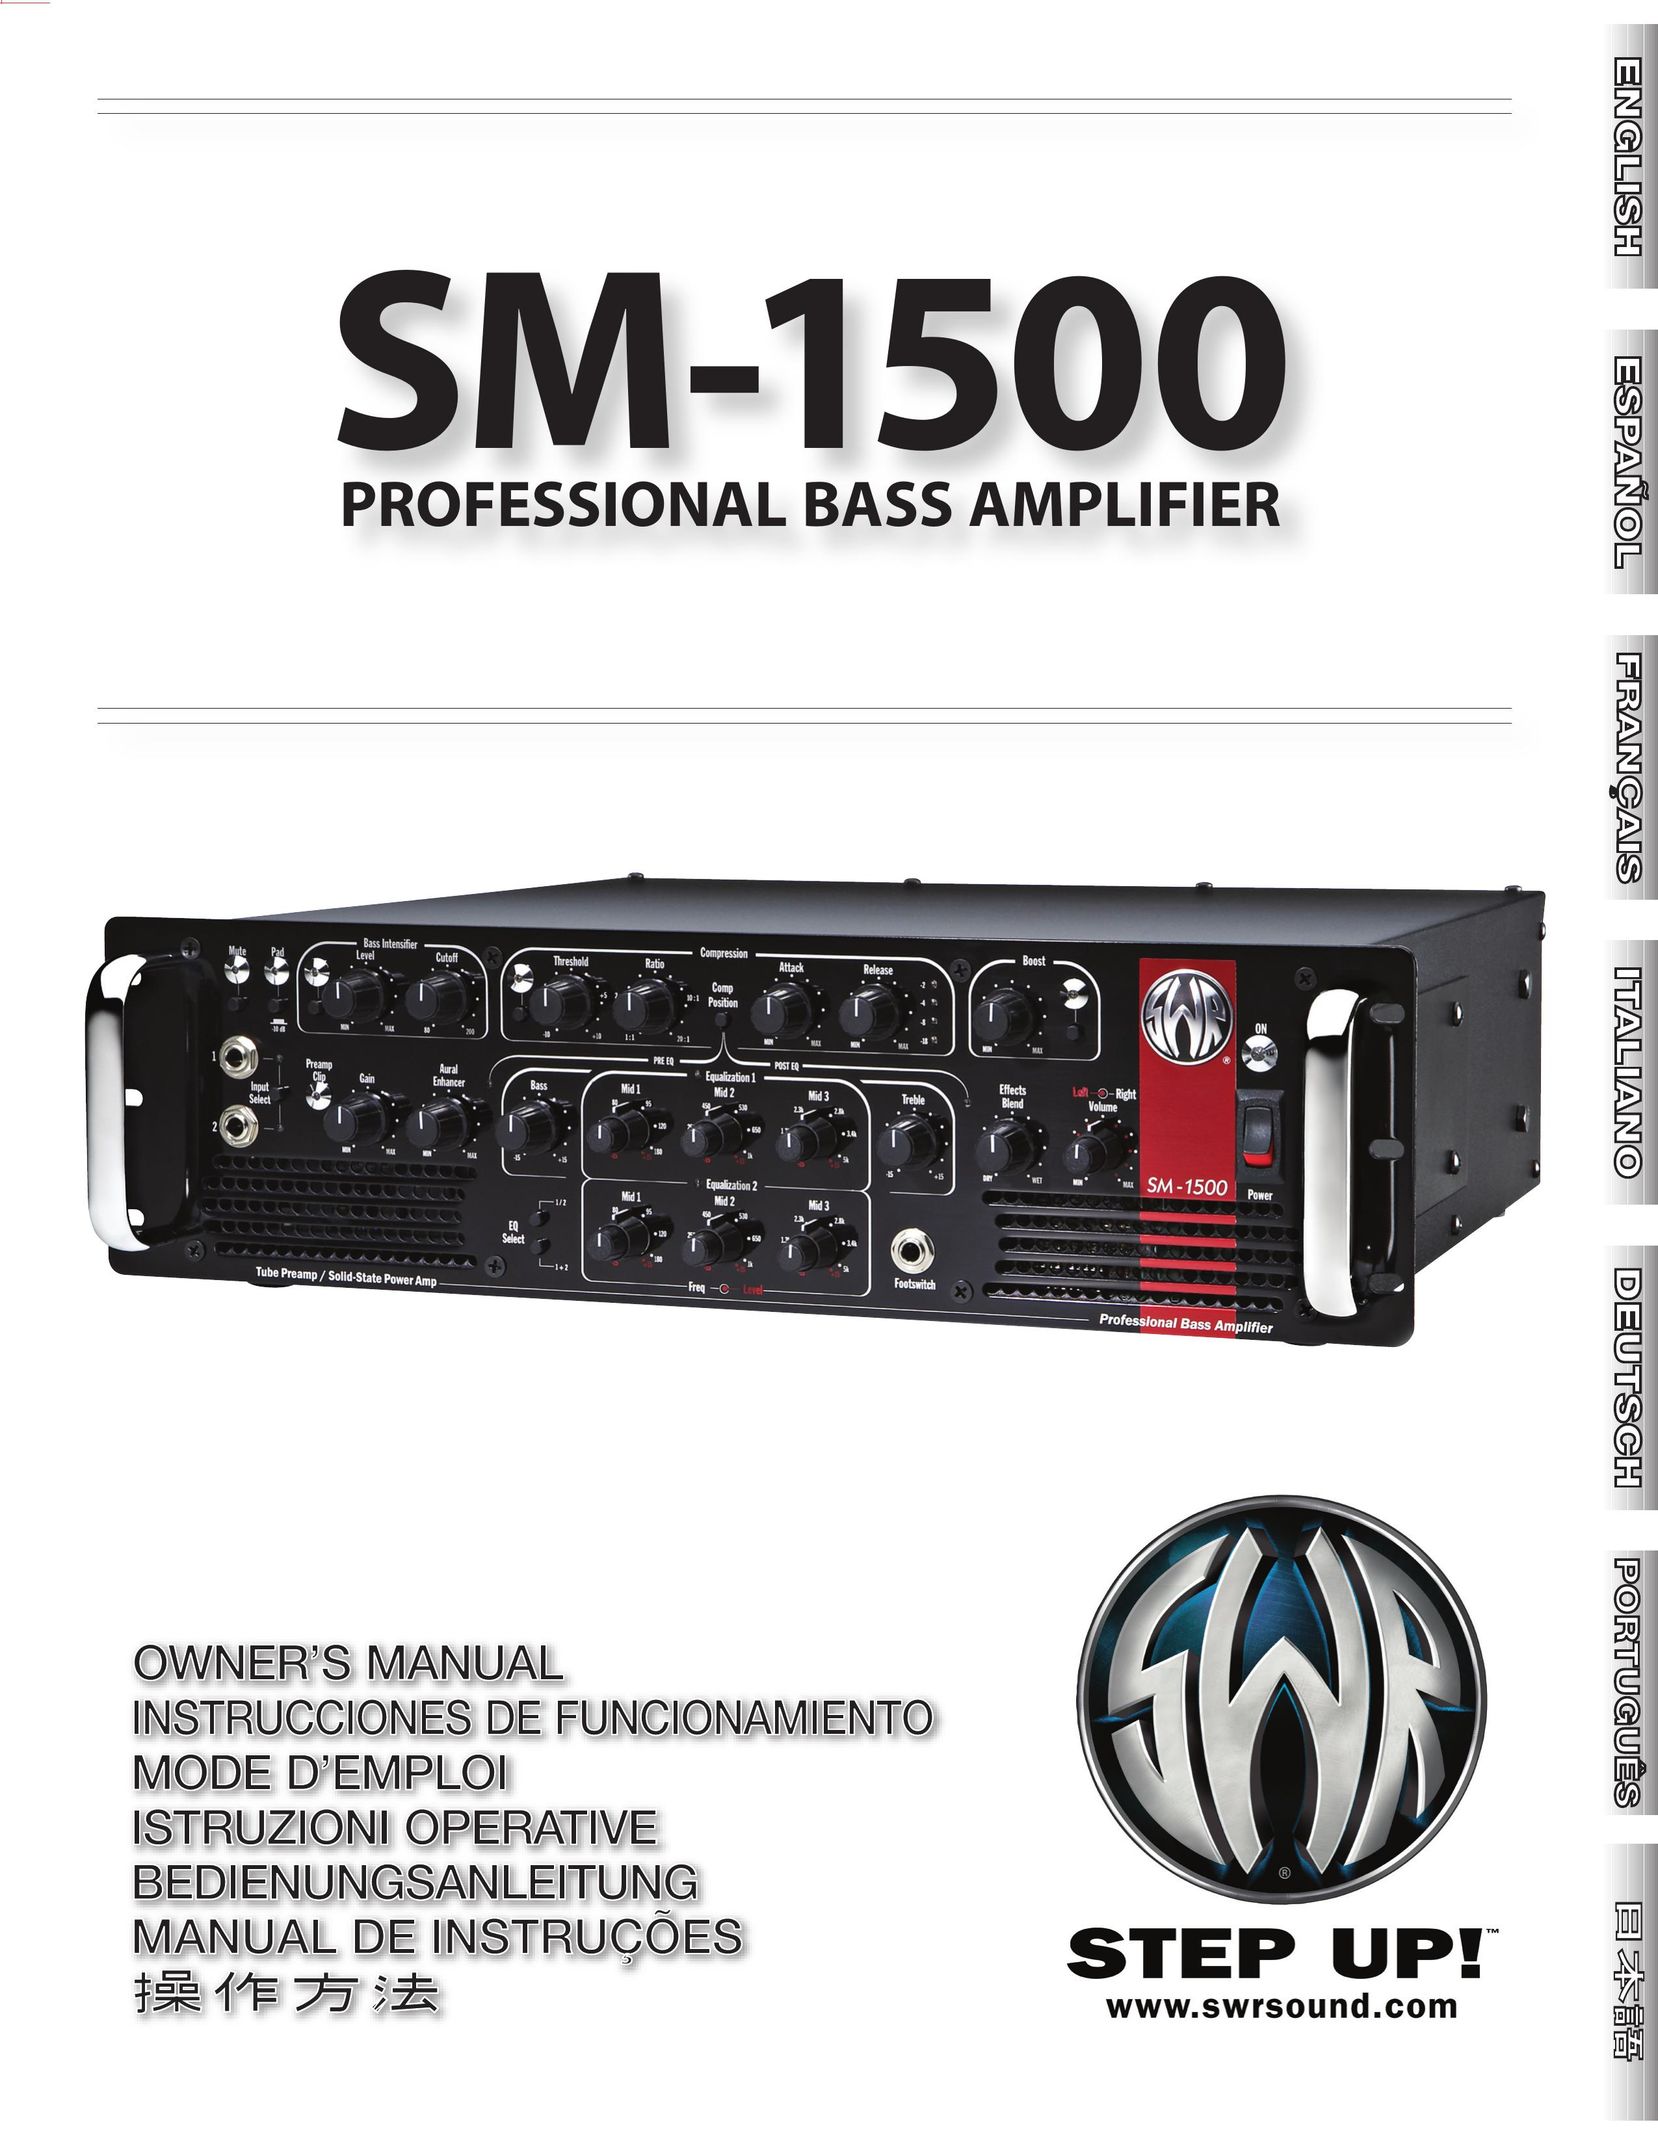 SWR Sound SM-1500 Stereo Amplifier User Manual